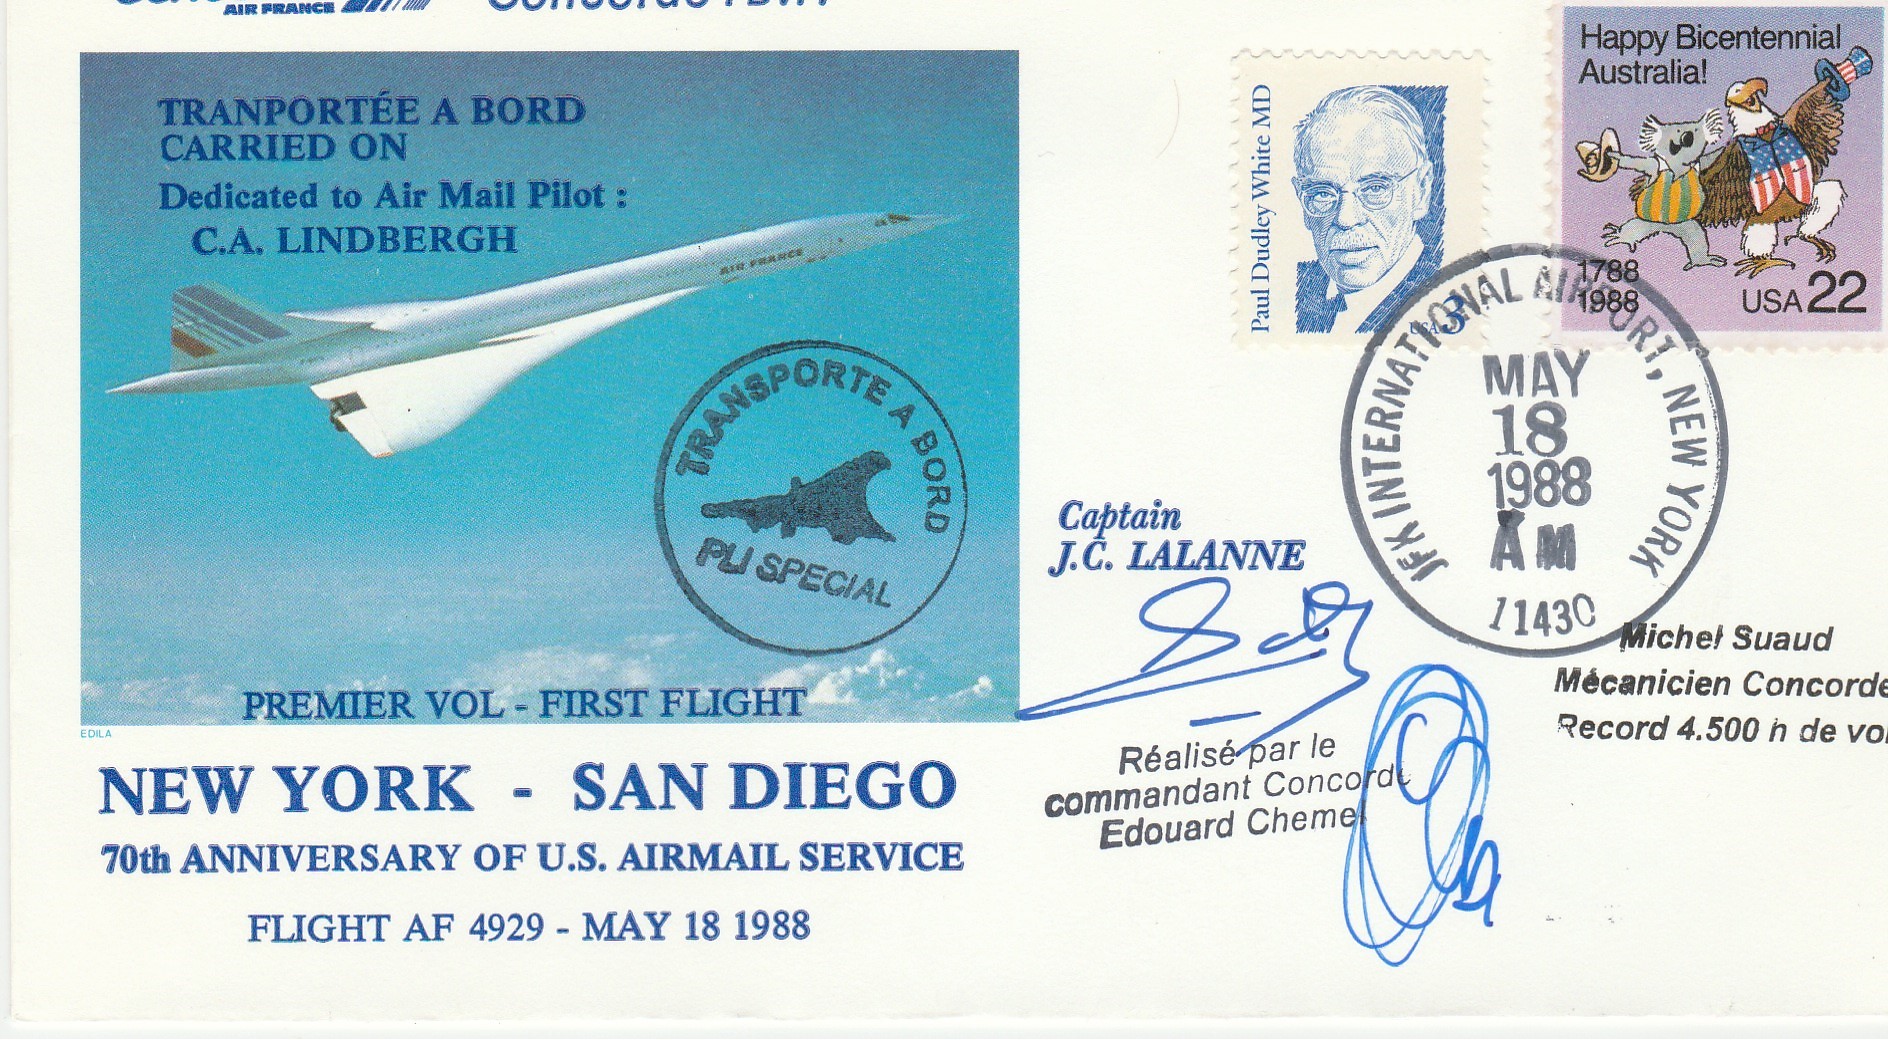 Air France Concorde cover flown on 1988 New York San Diego 70th ann US Airmail service signed by